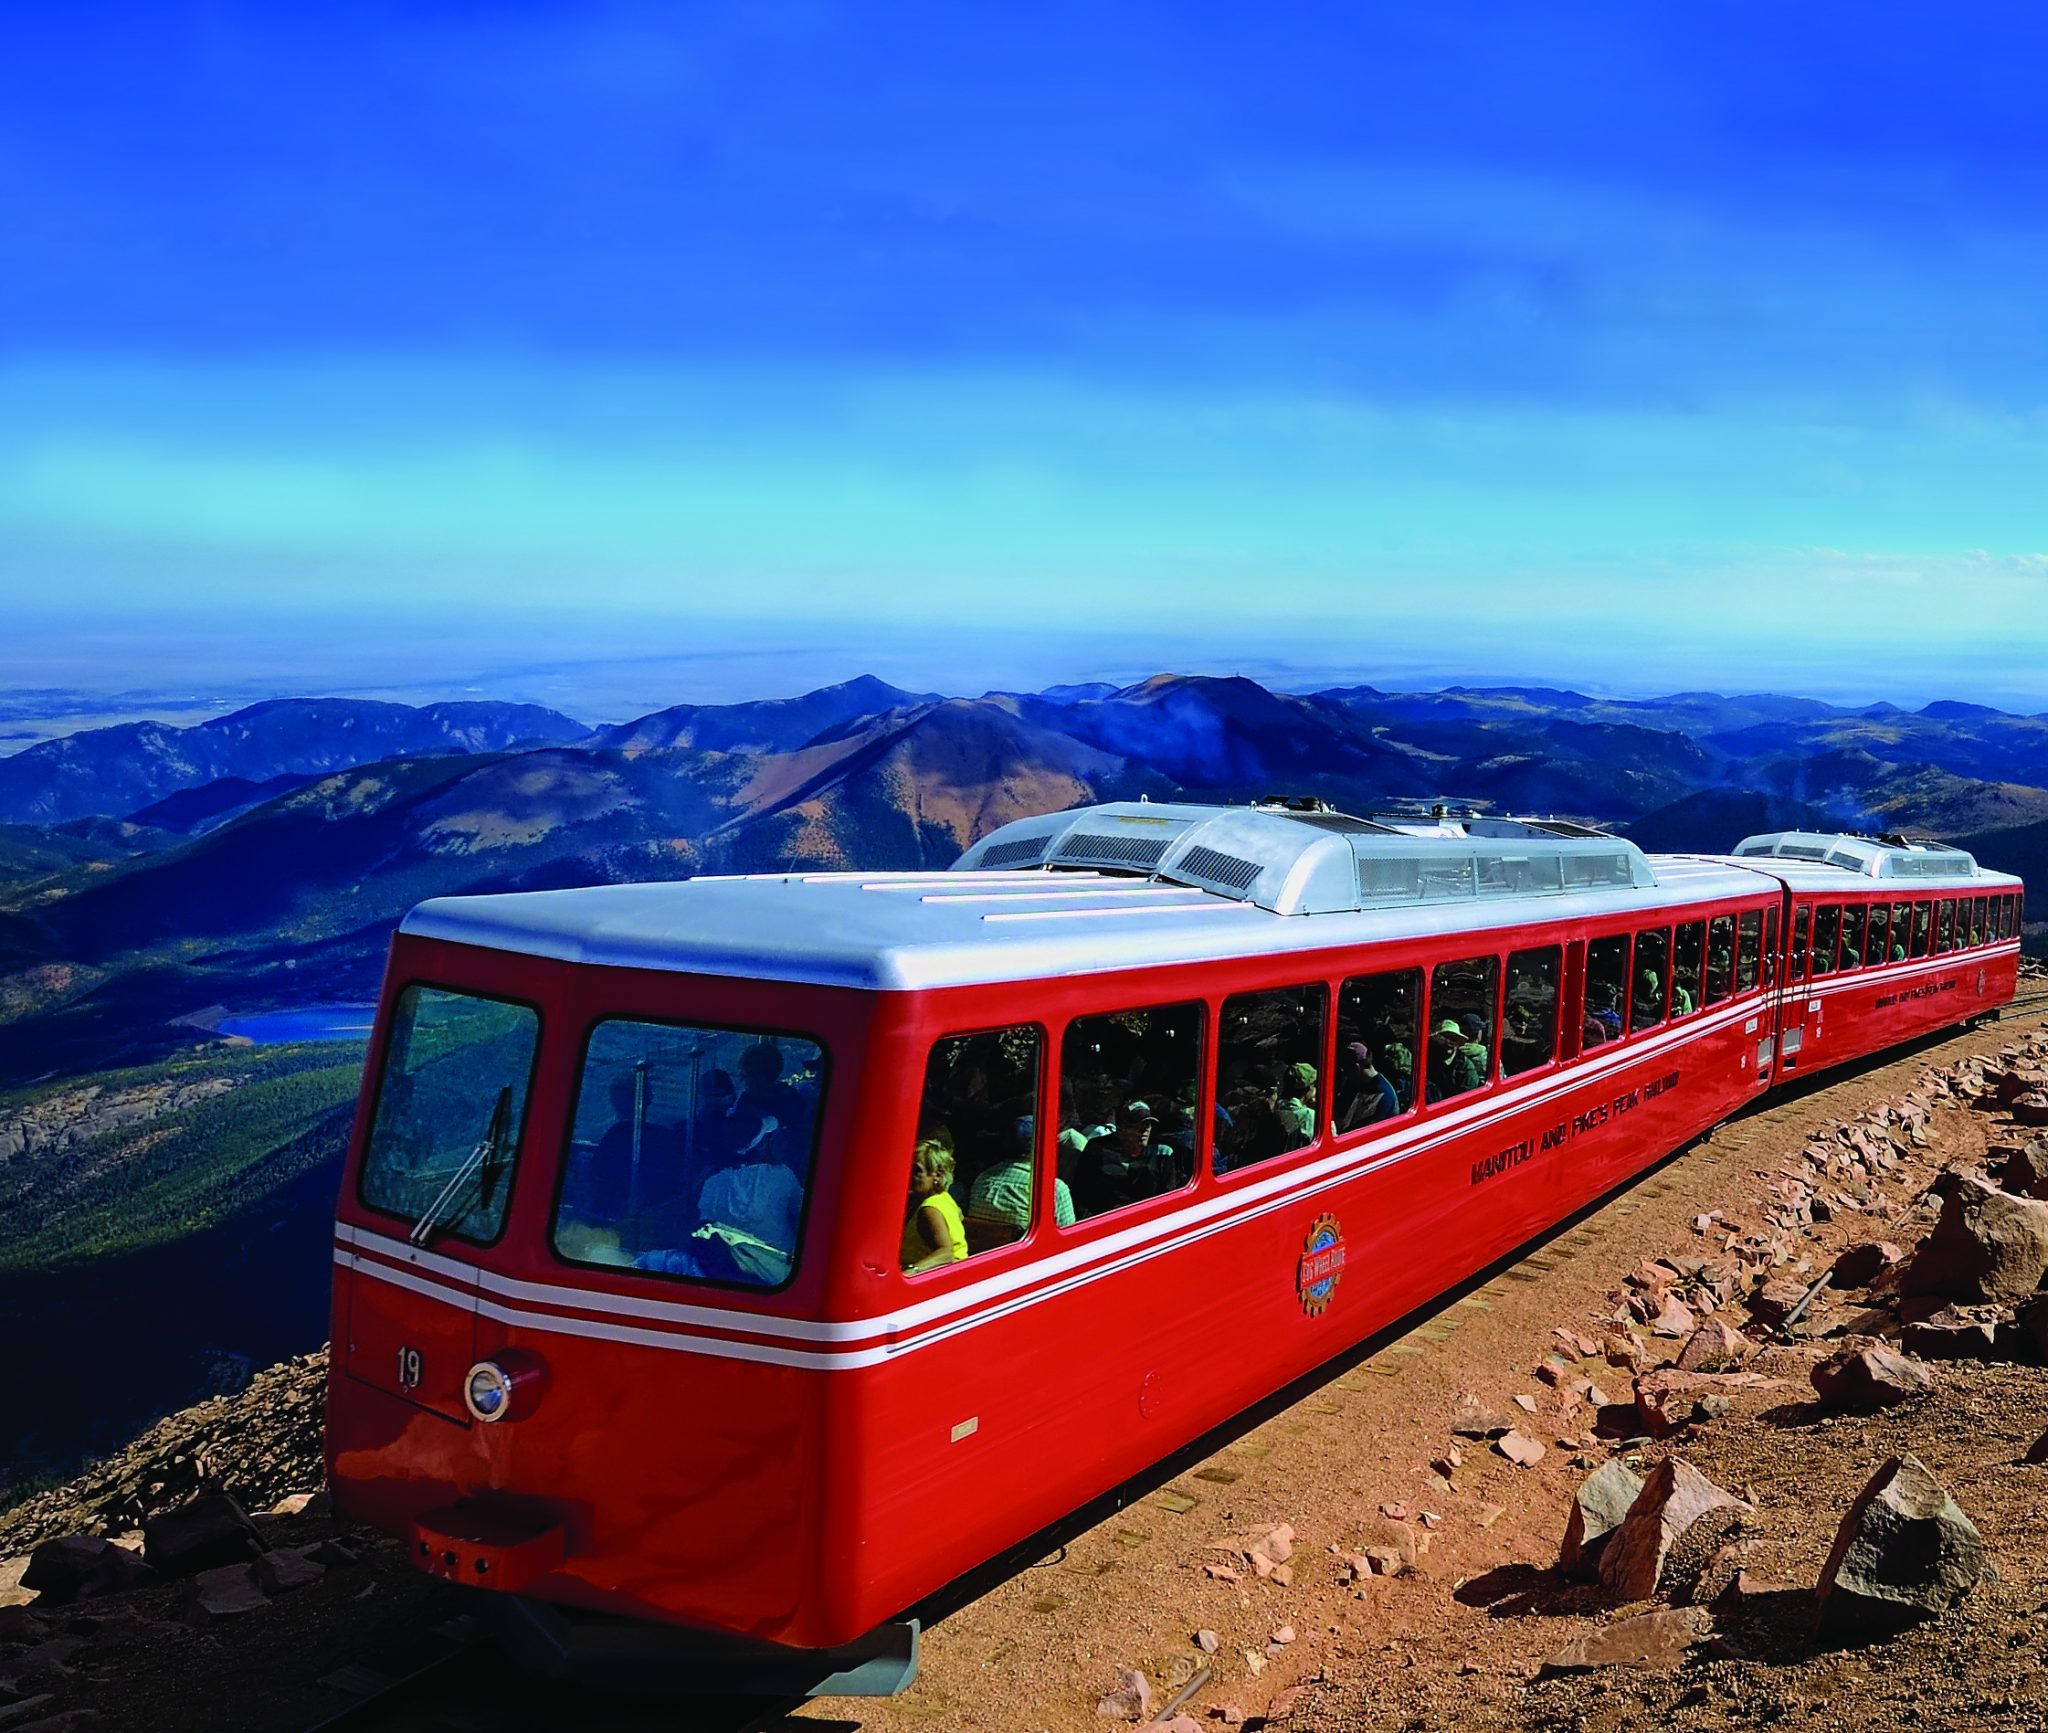 The Broadmoor Colorado Springs Colorado Cherry Creek Magazine The Broadmoor Manitou and Pikes Peak Cog Railway Pikes Peak Manitou Springs Train Travel History Outdoors Family